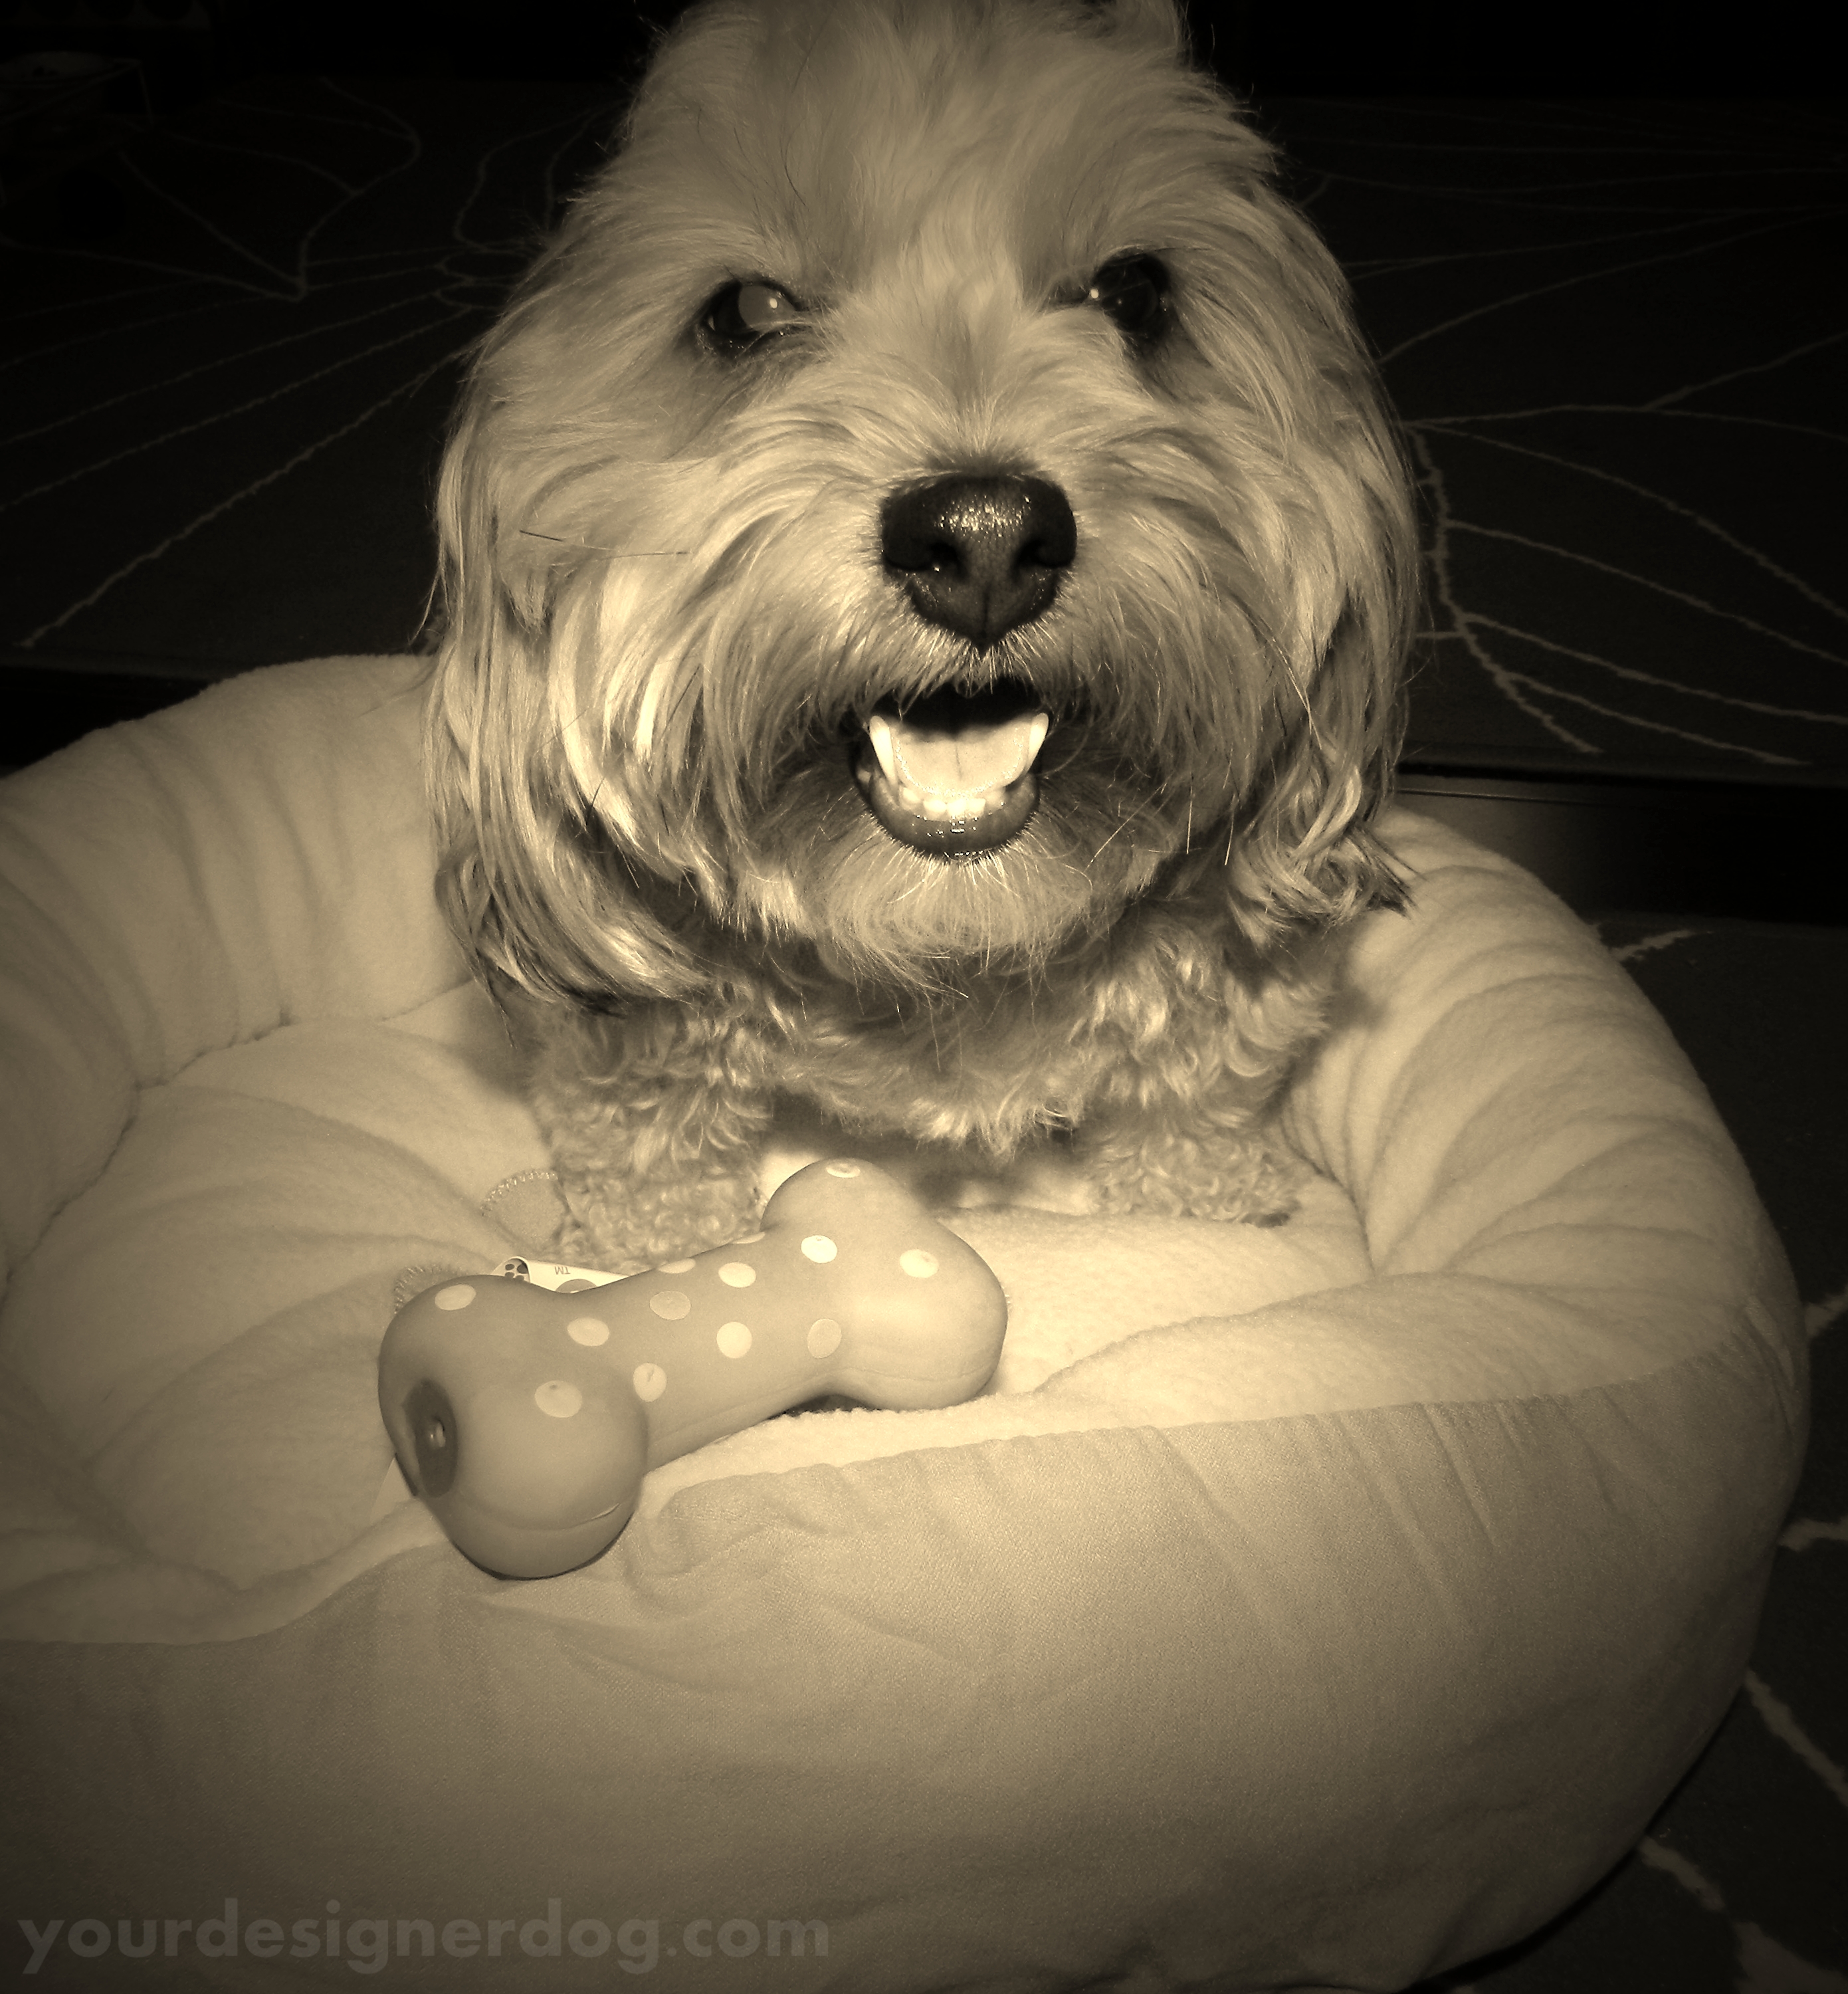 dogs, designer dogs, yorkipoo, yorkie poo, sepia photography, dog bed